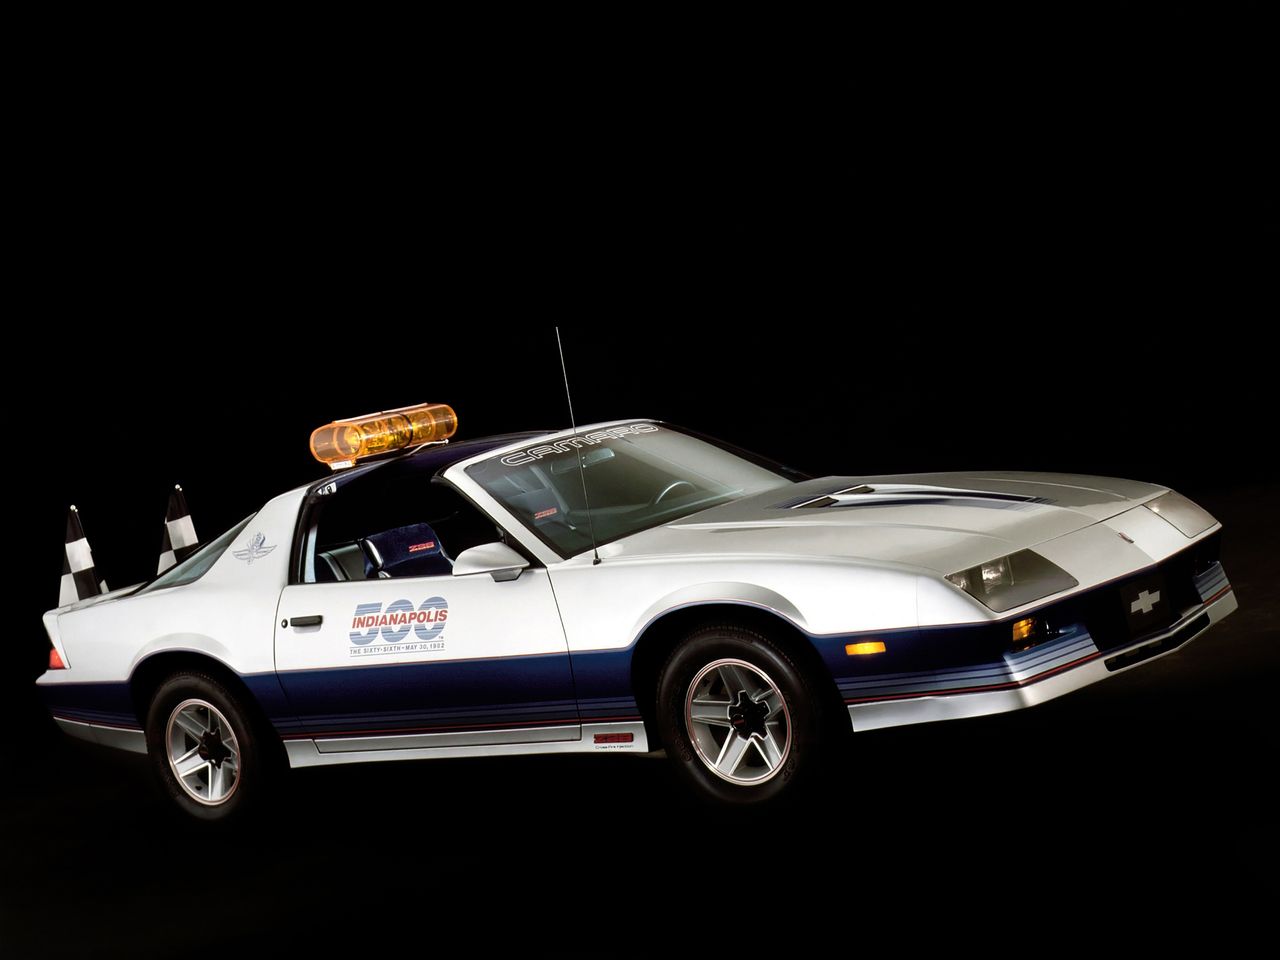 1982 Chevrolet Camaro Z28 Indy 500 Pace Car